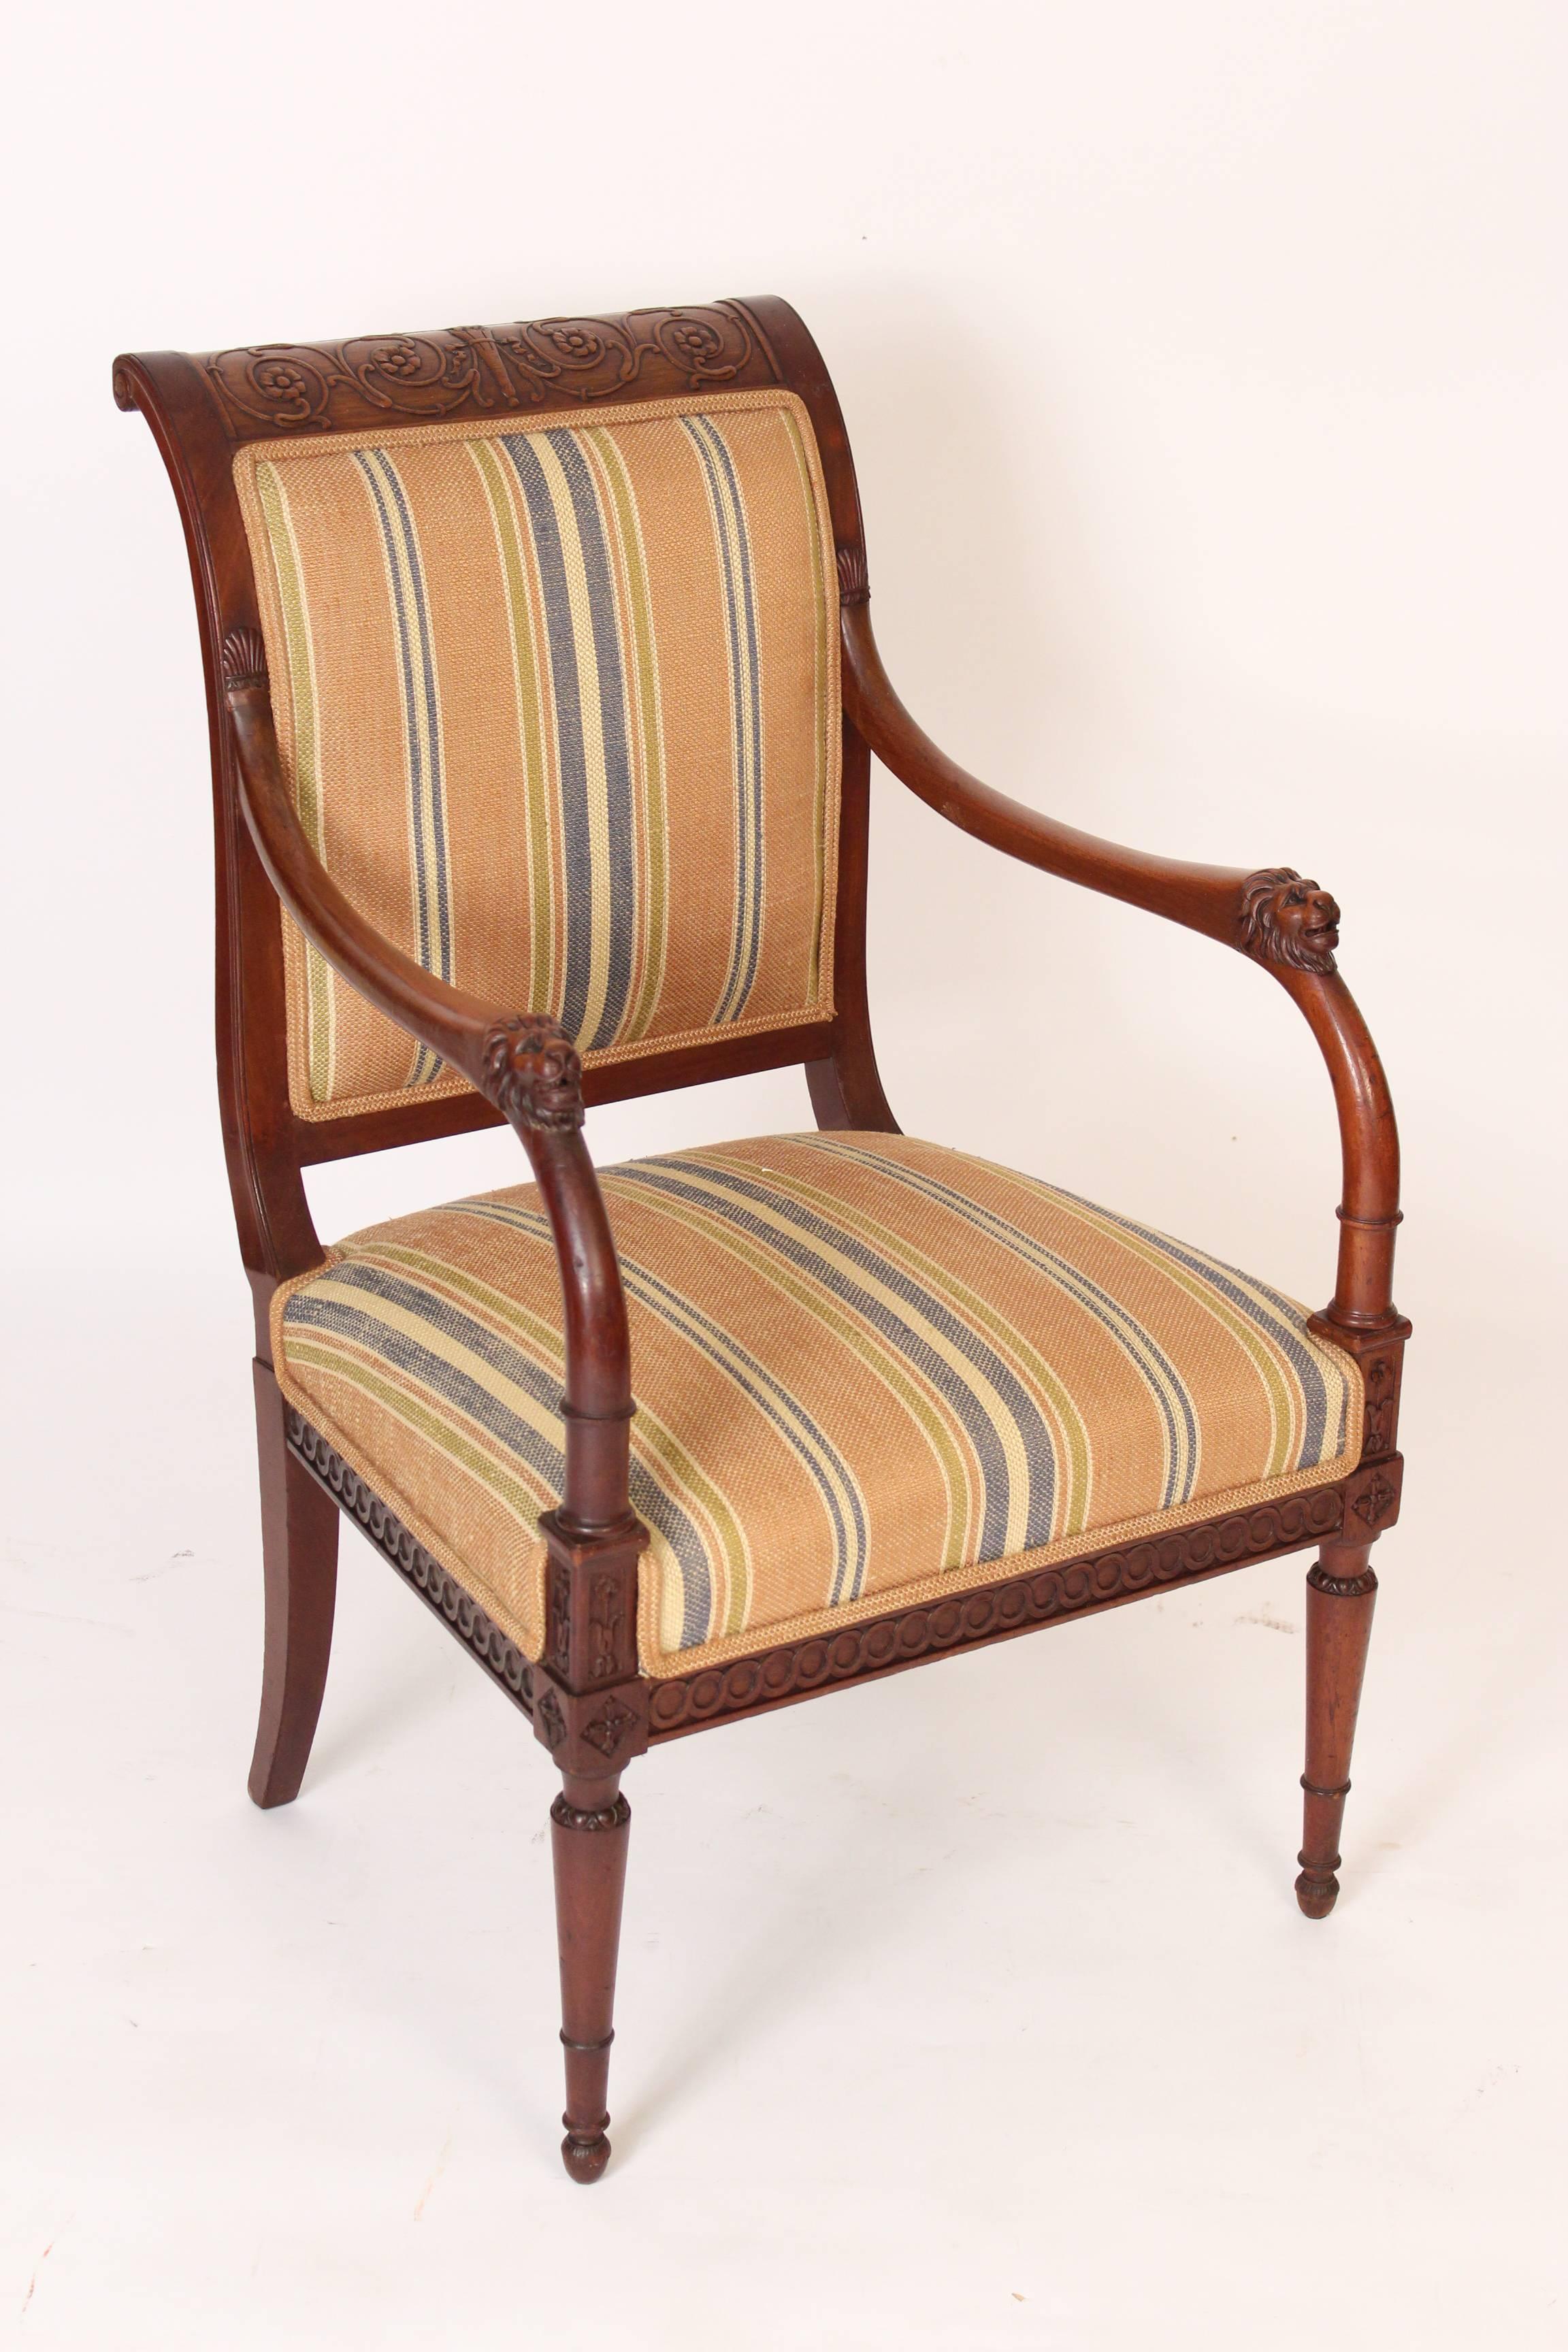 Pair of Directoire style mahogany armchairs made by Maison Jansen,
circa 1930. The underside of the front seat rail, Jansen is stamped into the wood.